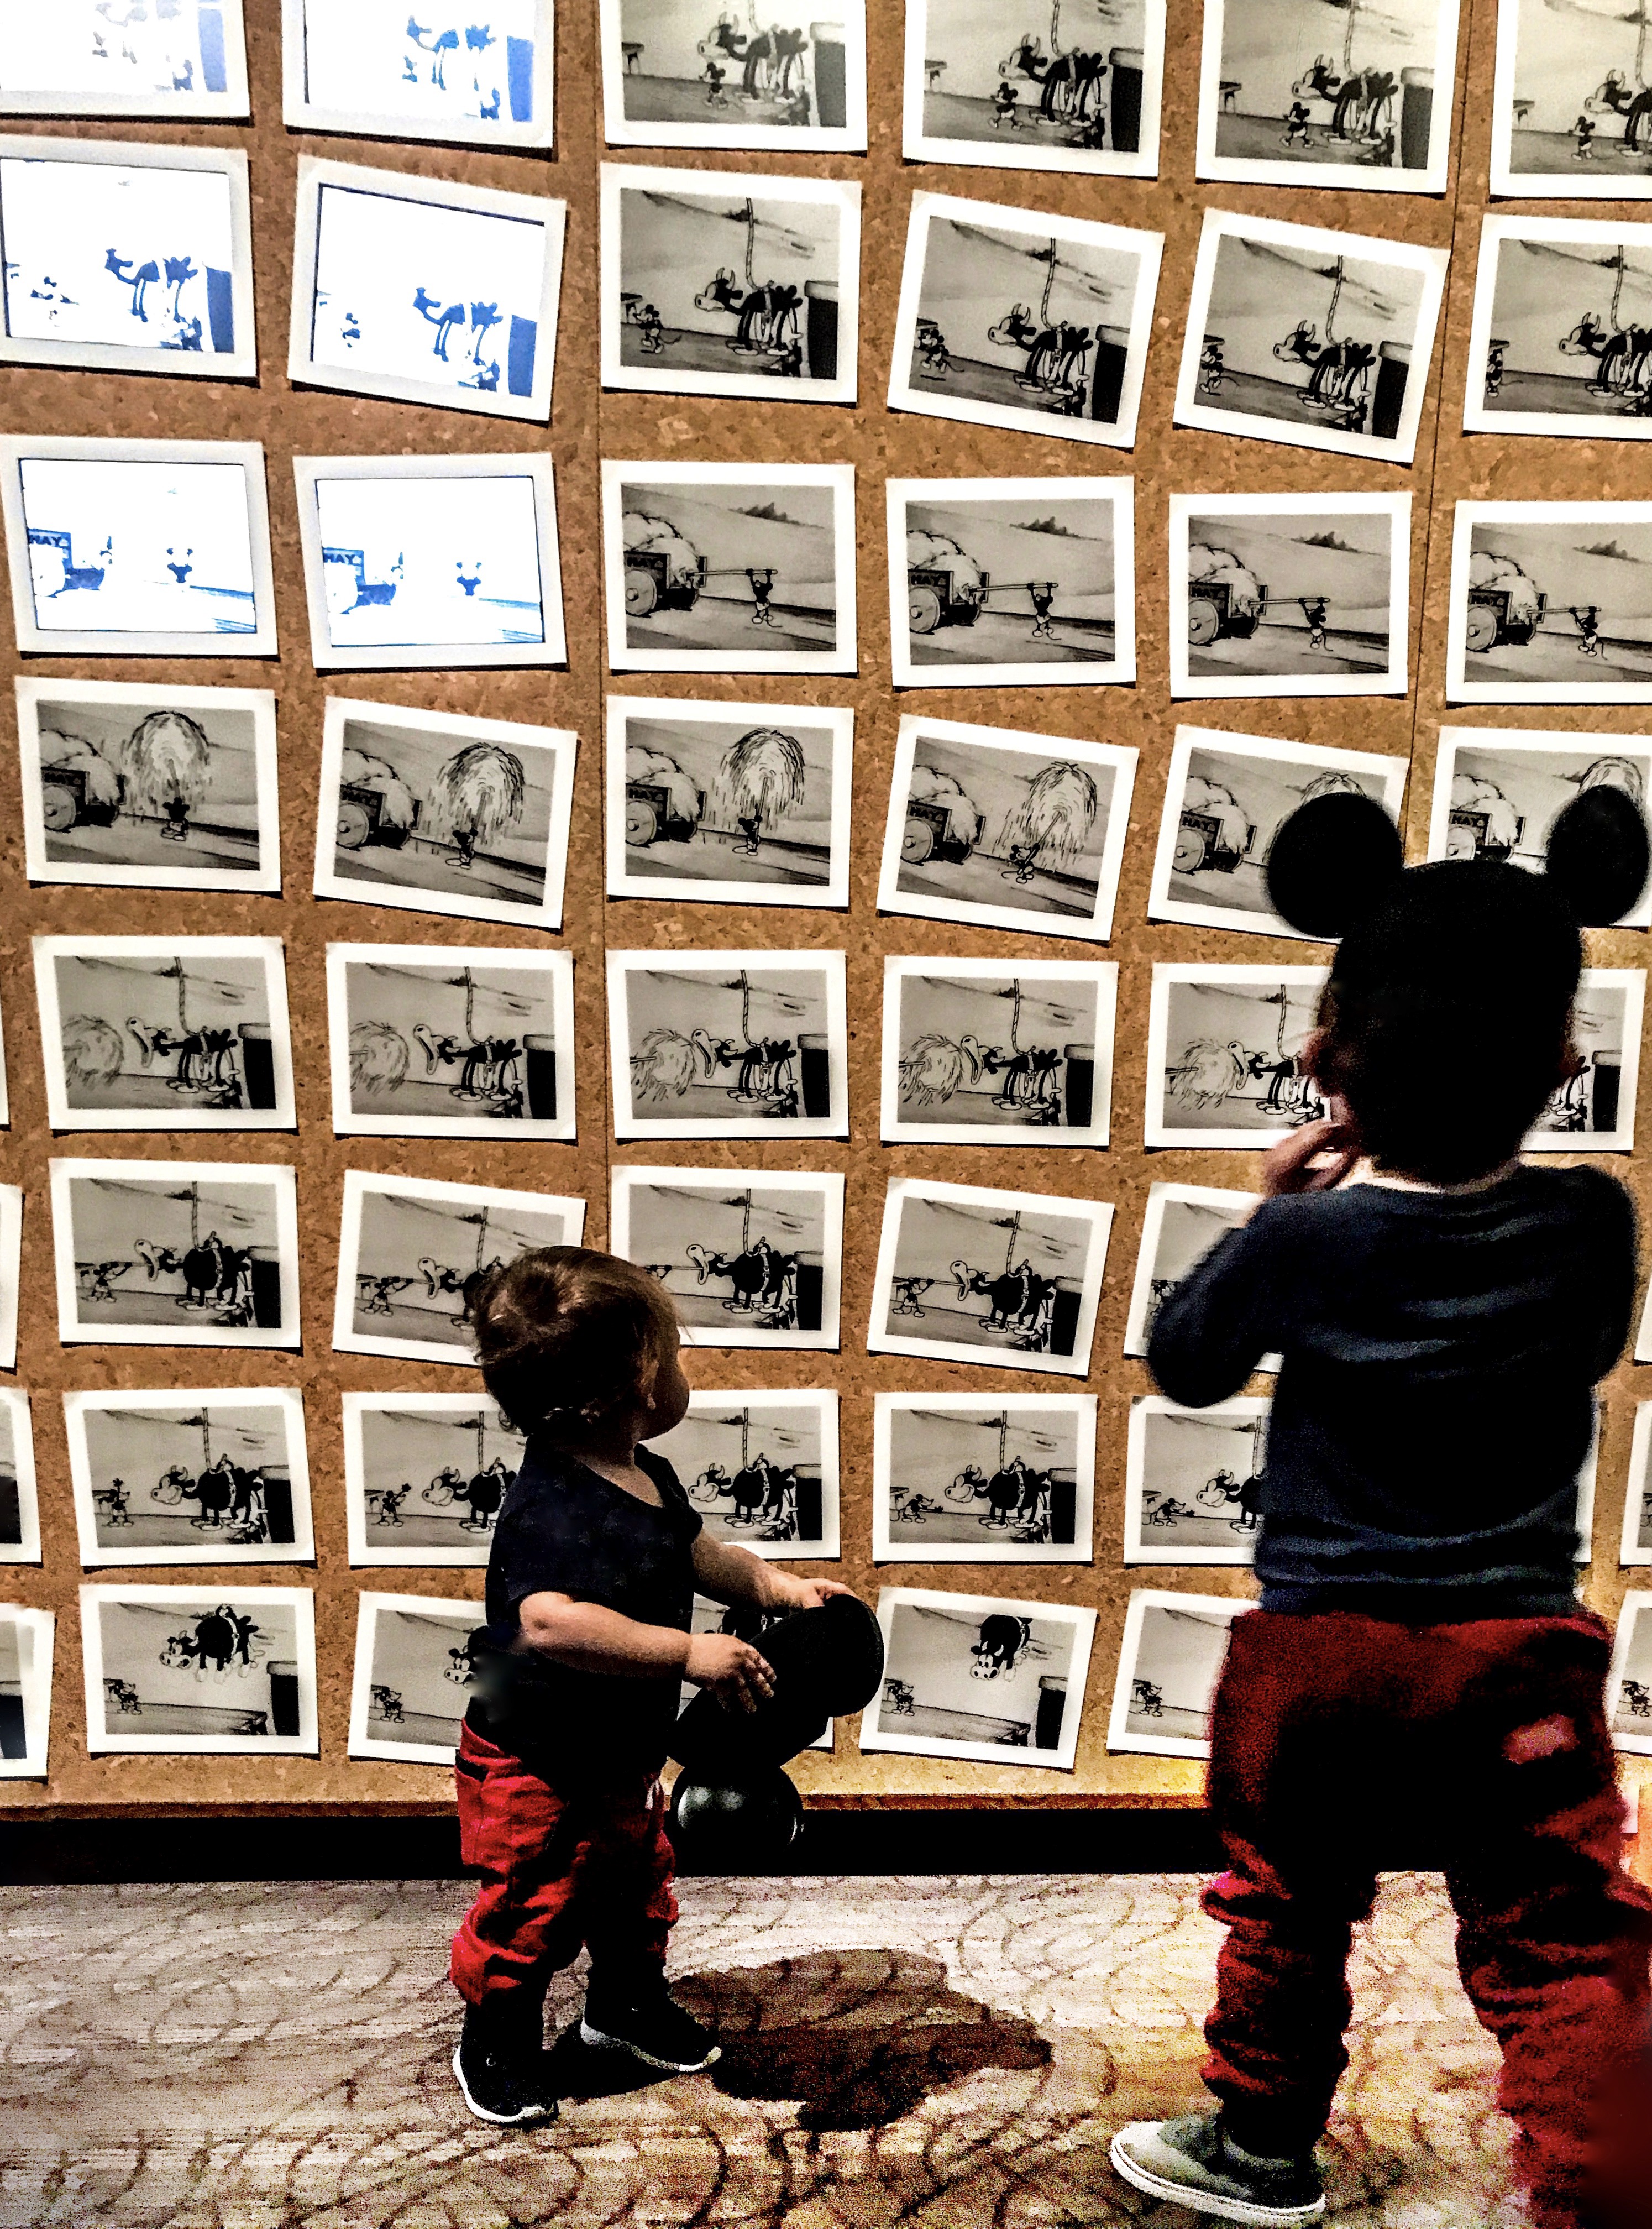 Guide to the Walt Disney Museum in San Francisco | Things to Do in San Francisco with Kids | Henry and Andrew’s Guide (www.henryandandrewsguide.com)